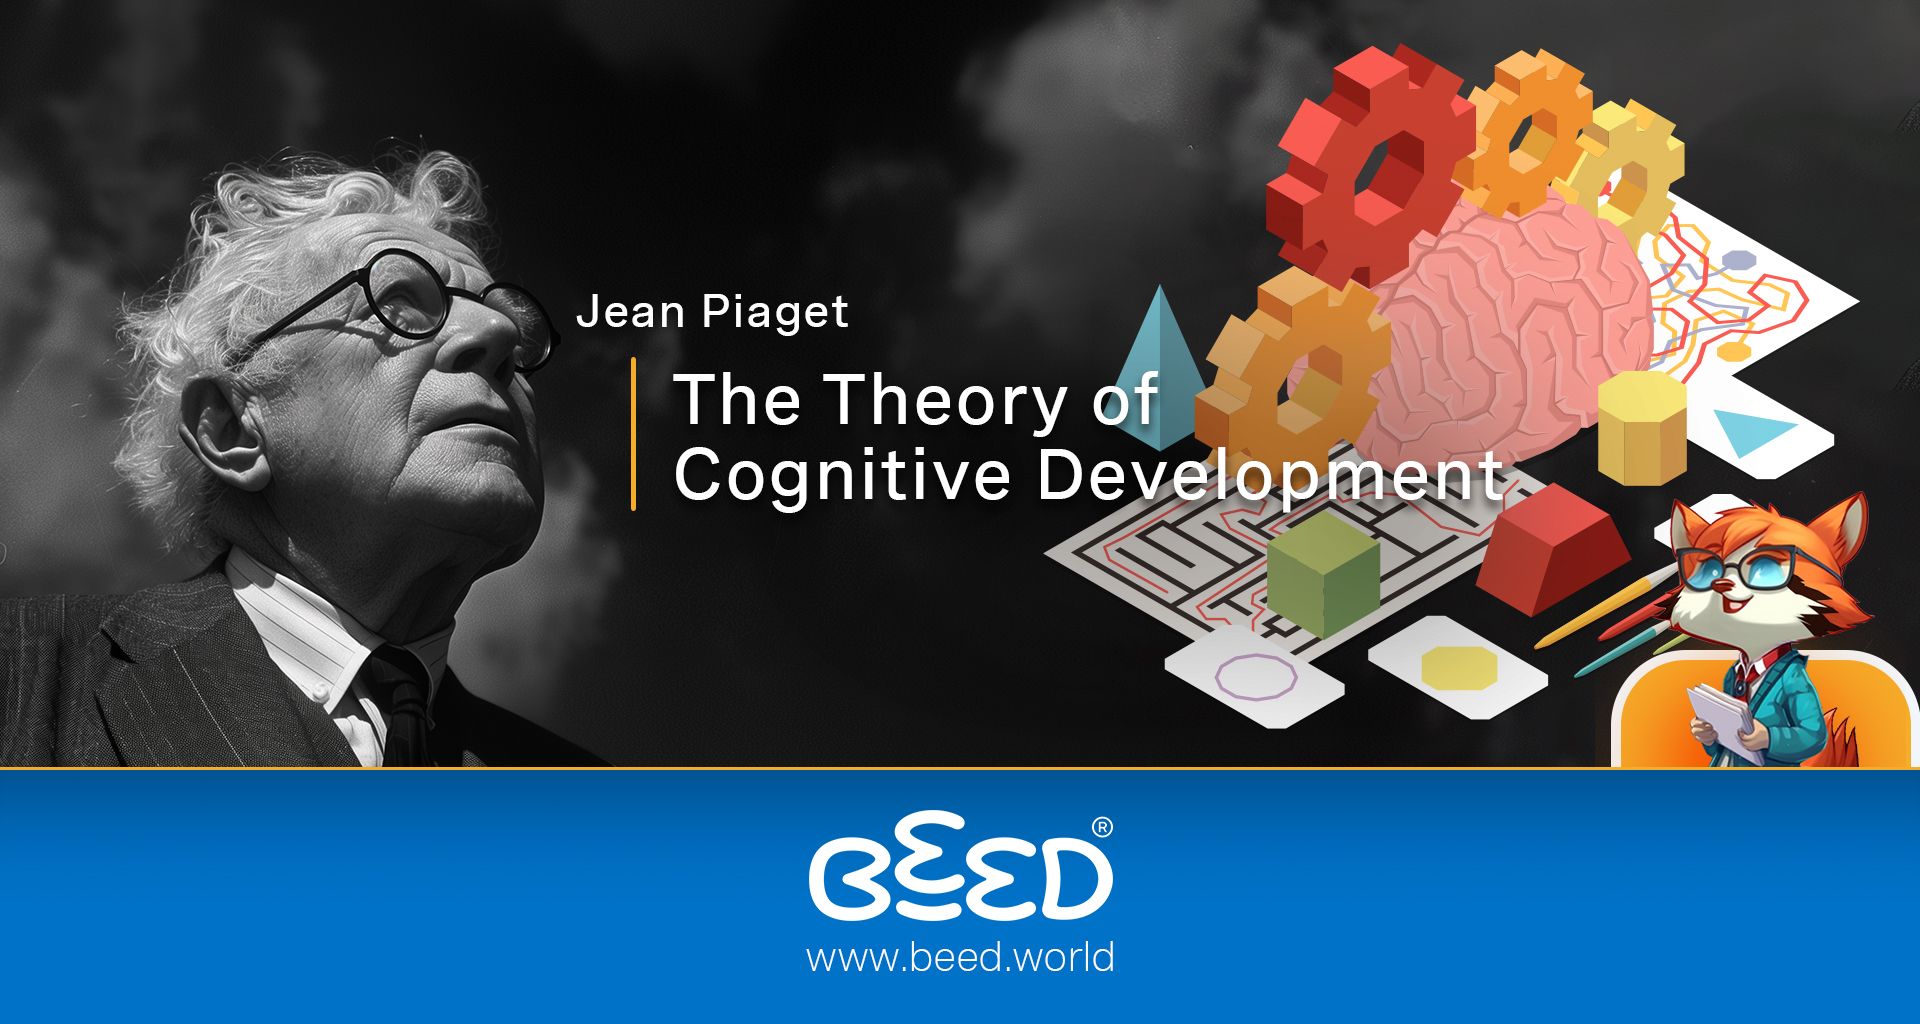 Jean Piaget - The Theory of Cognitive Development